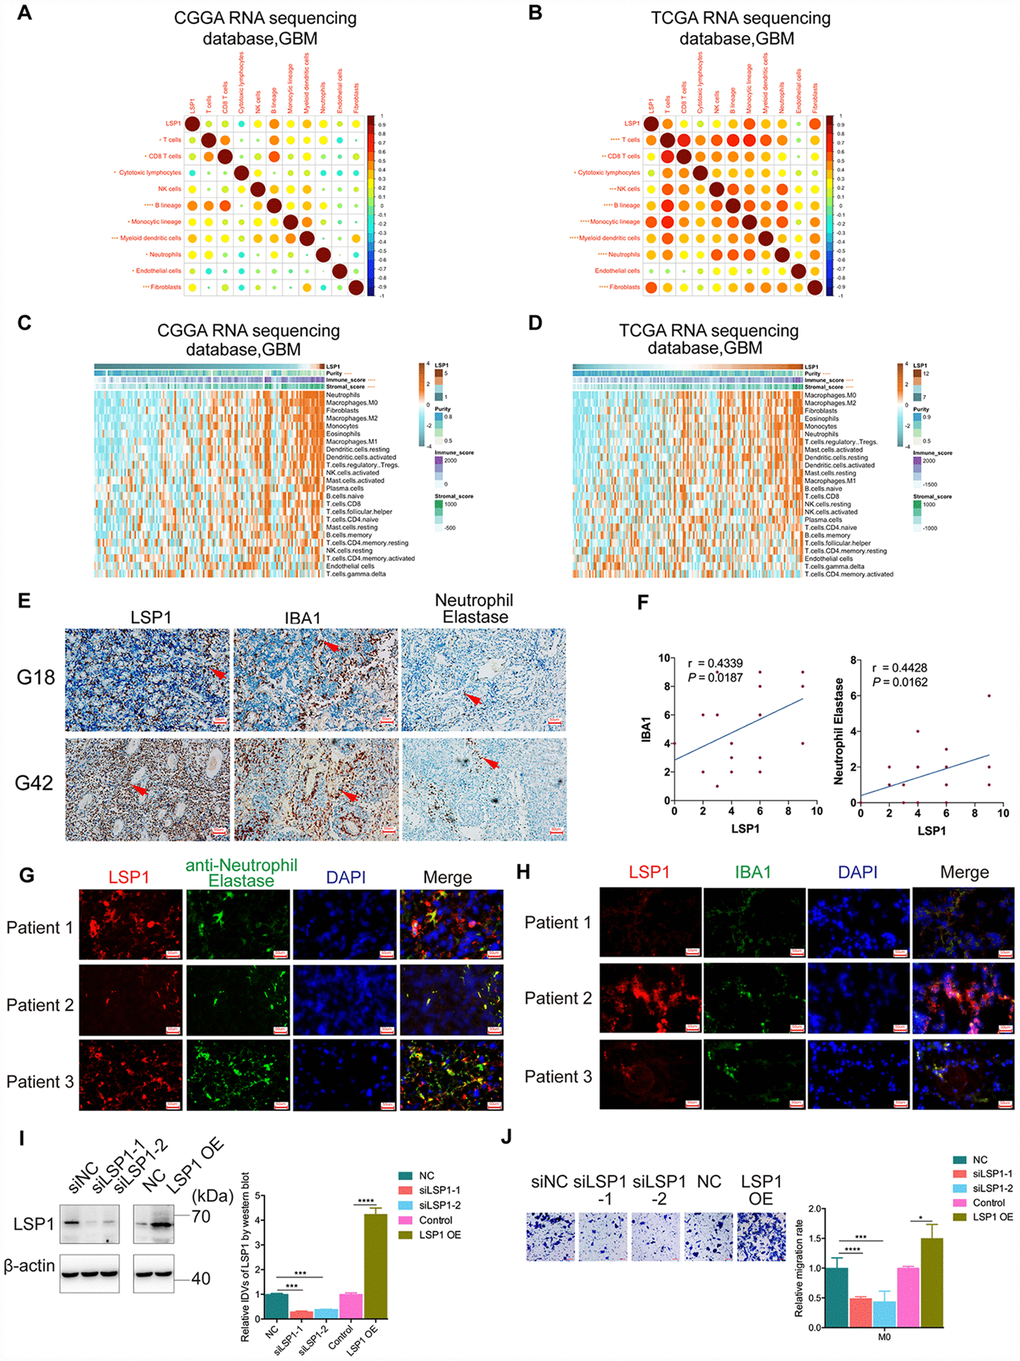 High LSP1 expression contributed to the immunosuppressive microenvironment in GBM. (A and B) The correlation analysis of LSP1 expression and non-tumor immune and stromal cell populations in GBM by MCP-counter (A, CGGA RNA sequencing dataset, n = 138; B, TCGA RNA sequencing dataset, n = 155; with Pearson correlation analysis). (C and D) Association of LSP1 expression with tumor purity, immune and stromal score, and twenty-four immune cell populations in GBM microenvironment by GSVA. (C, CGGA RNA sequencing dataset, n = 138; D, TCGA RNA sequencing dataset, n = 155; with Pearson correlation analysis). (E and F) Representative IHC images (E, 200X, scale bar = 50μm) and analysis (F) verifying LSP1 expression correlated with macrophages and neutrophil in 29 cases of GBM samples (macrophage: r = 0.4339, P = 0.0187; neutrophil: r = 0.4428, P = 0.0162; n = 15; with Pearson correlation analysis). (G) Representative IF images of LSP1 (red), Neutrophil Elastase (green), and DAPI (blue) staining in clinical GBM samples (n = 3) (200X, scale bar = 50μm). (H) Representative IF images of LSP1 (red), IBA1 (green), and DAPI (blue) staining in clinical GBM samples (n = 3) (200X, scale bar = 50μm). (I) Representative western blot image (left panel) and analysis (right panel) of LSP1 expression in M0 macrophages induced from THP-1 cells. (J) Transwell assay showing LSP1 knockdown inhibit the migration of M0 macrophages, and LSP1 overexpression enhanced their migration. CGGA, Chinese Glioma Genome Atlas; TCGA, The Cancer Genome Atlas; GBM, glioblastoma multiforme; LSP1, lymphocyte specific protein 1; IBA1, ionized calcium binding adapter molecule 1; DAPI, 4’,6-diamidino-2-phenylindole; IDH1, isocitrate dehydrogenase 1.